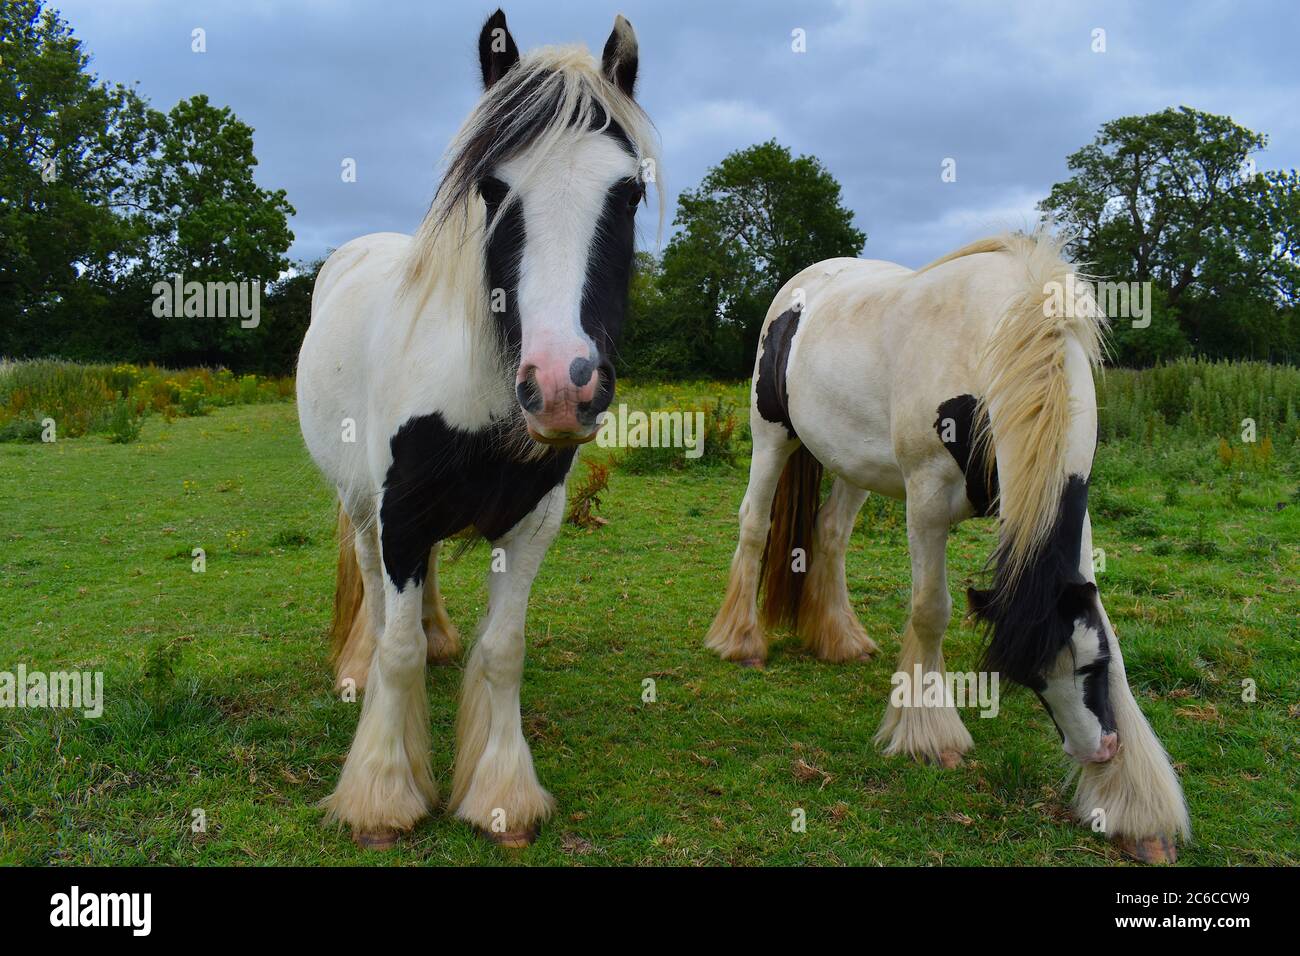 Gypsy horse has abundantly feathered legs thick tail and mane Feathering comes around the front knees and the rear hocks extending to the front hooves Stock Photo